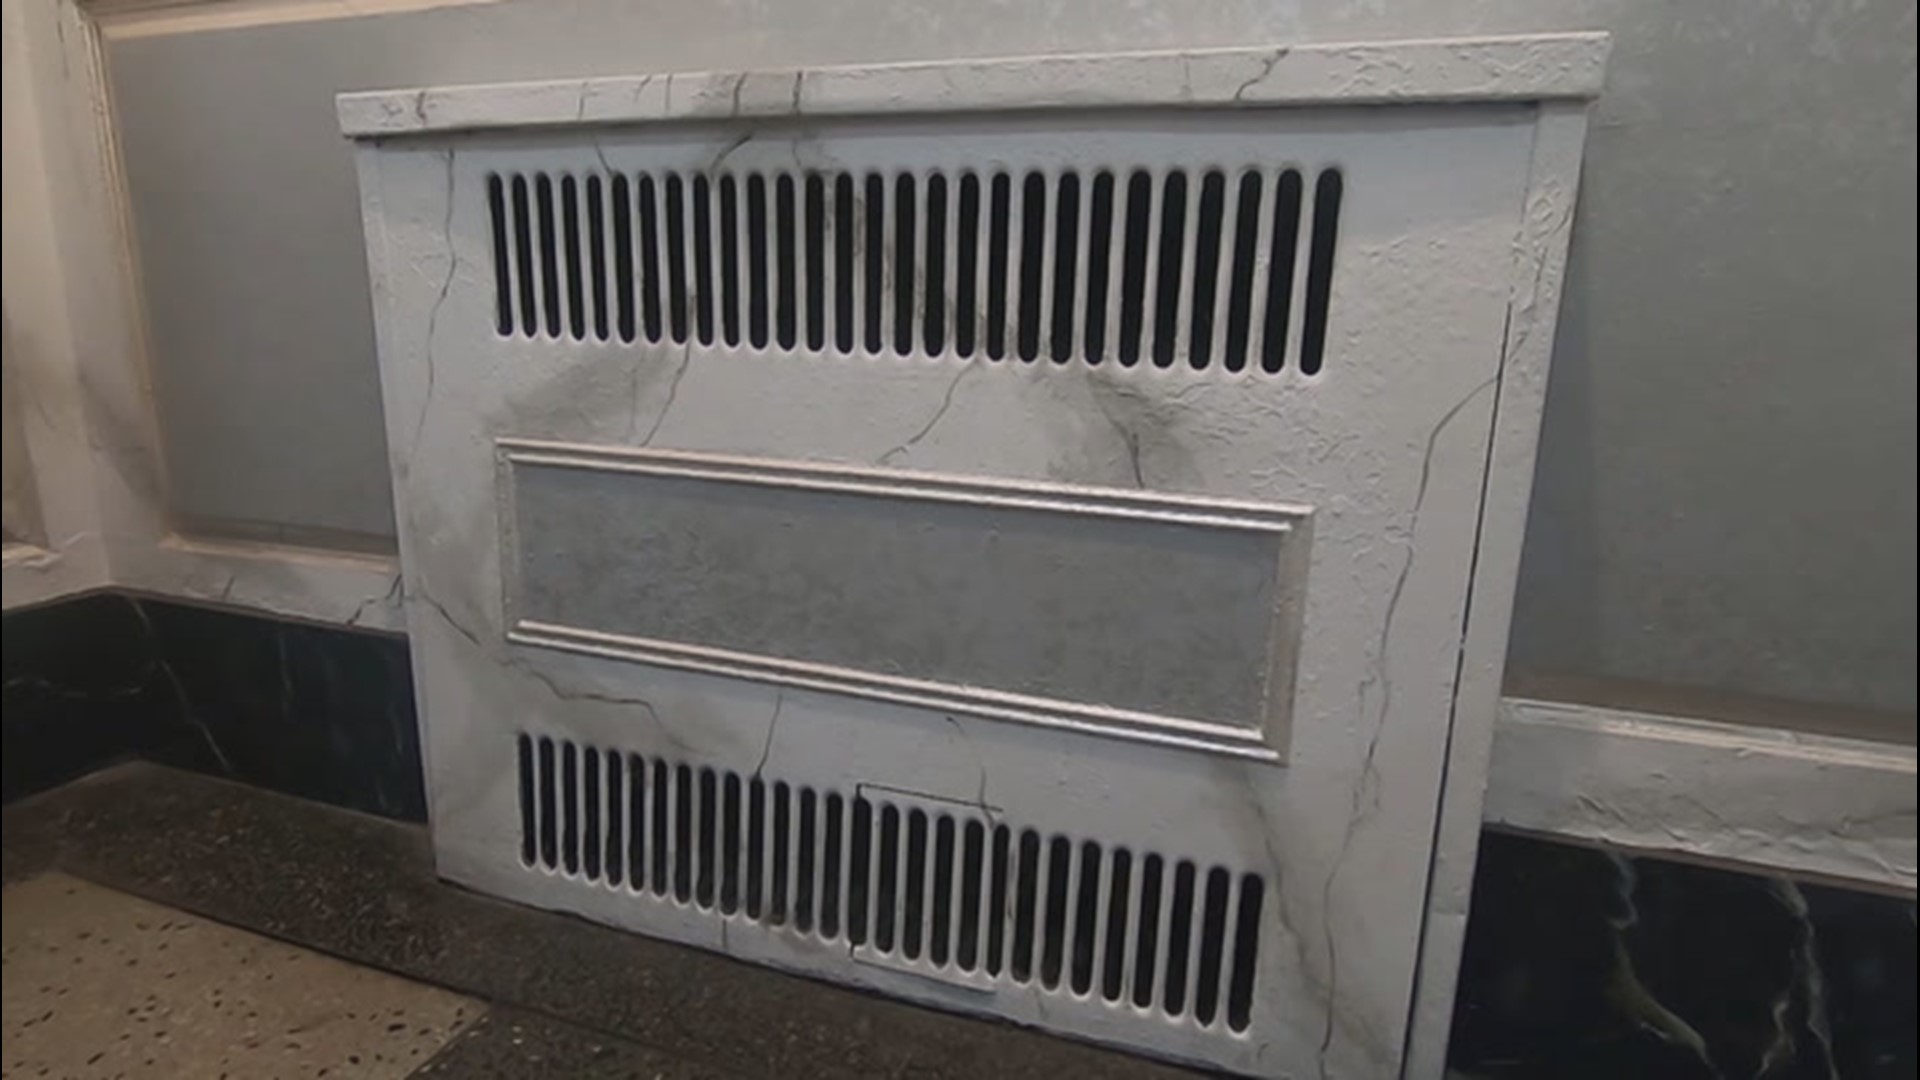 Radiators have a long history of heating homes across the country. AccuWeather's Dexter Henry explores how their use is evolving.